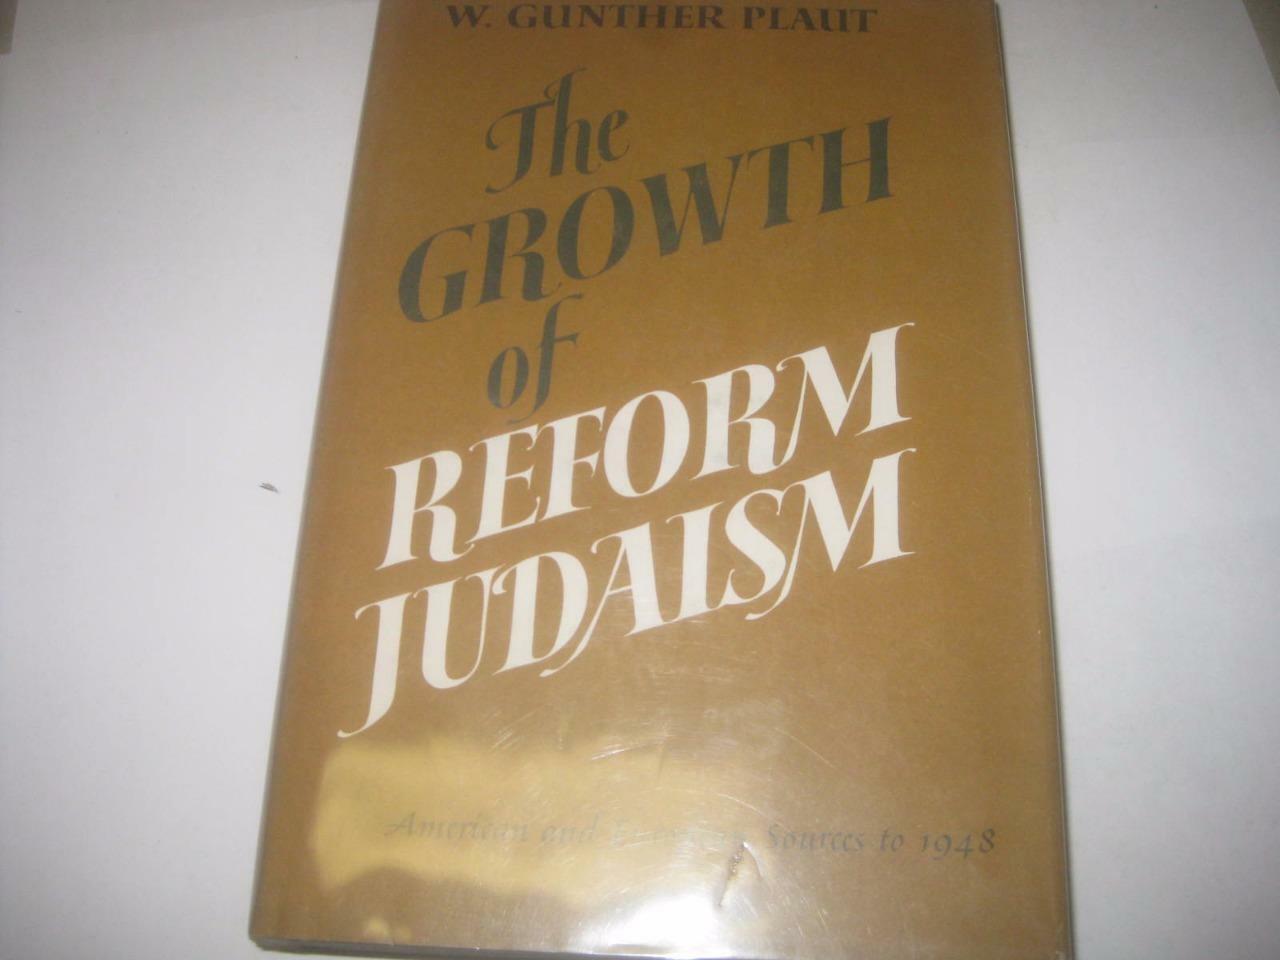 The Growth of Reform Judaism: American and European Sources by W. GUNTHER PLAUT